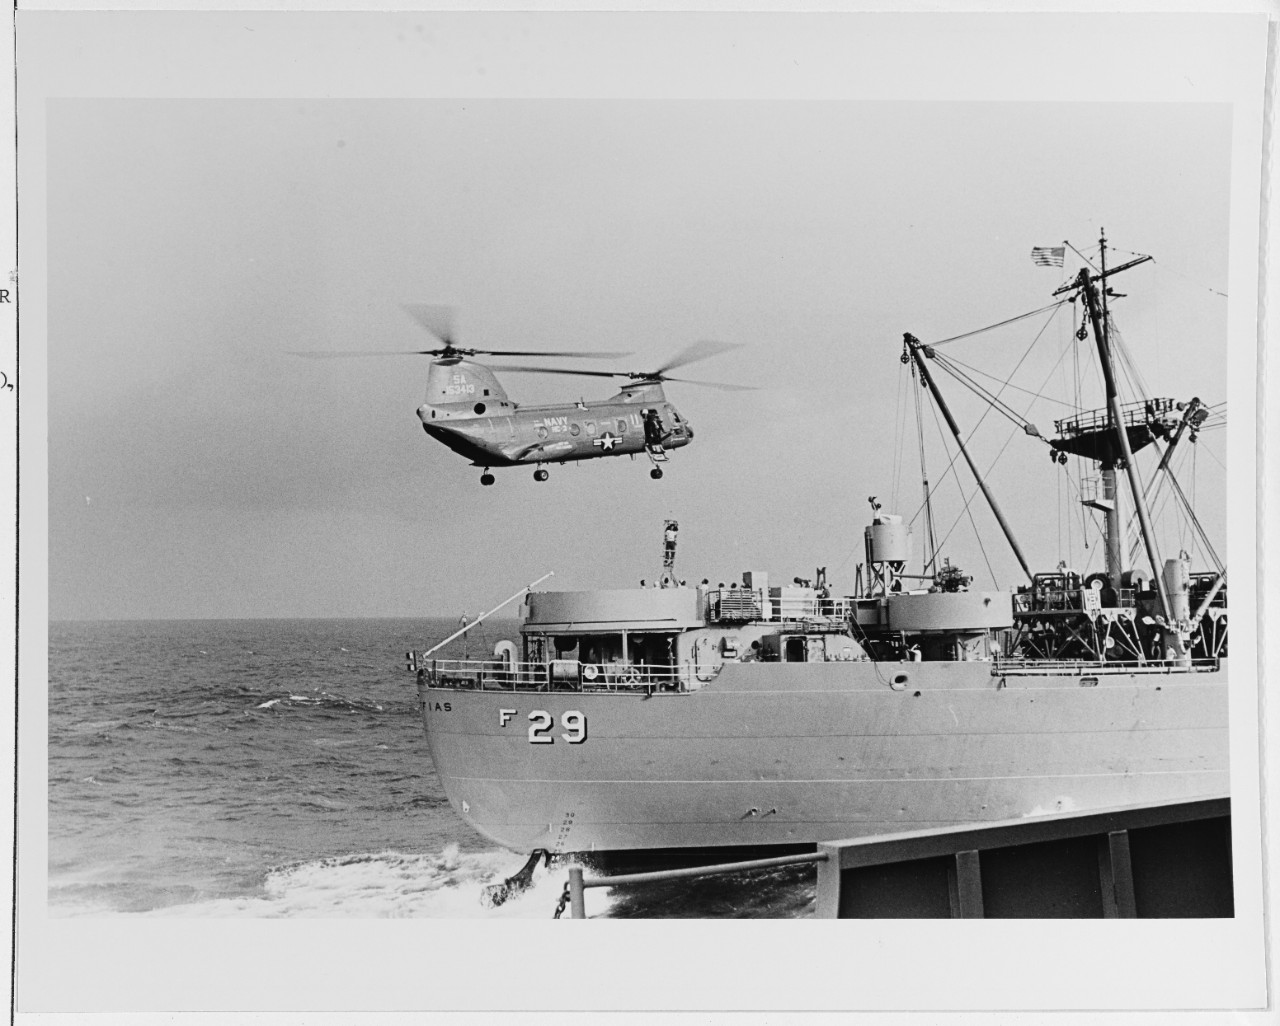 Usn 1137102 Transporting An Injured Crewman From Uss Grafias Af 29 To